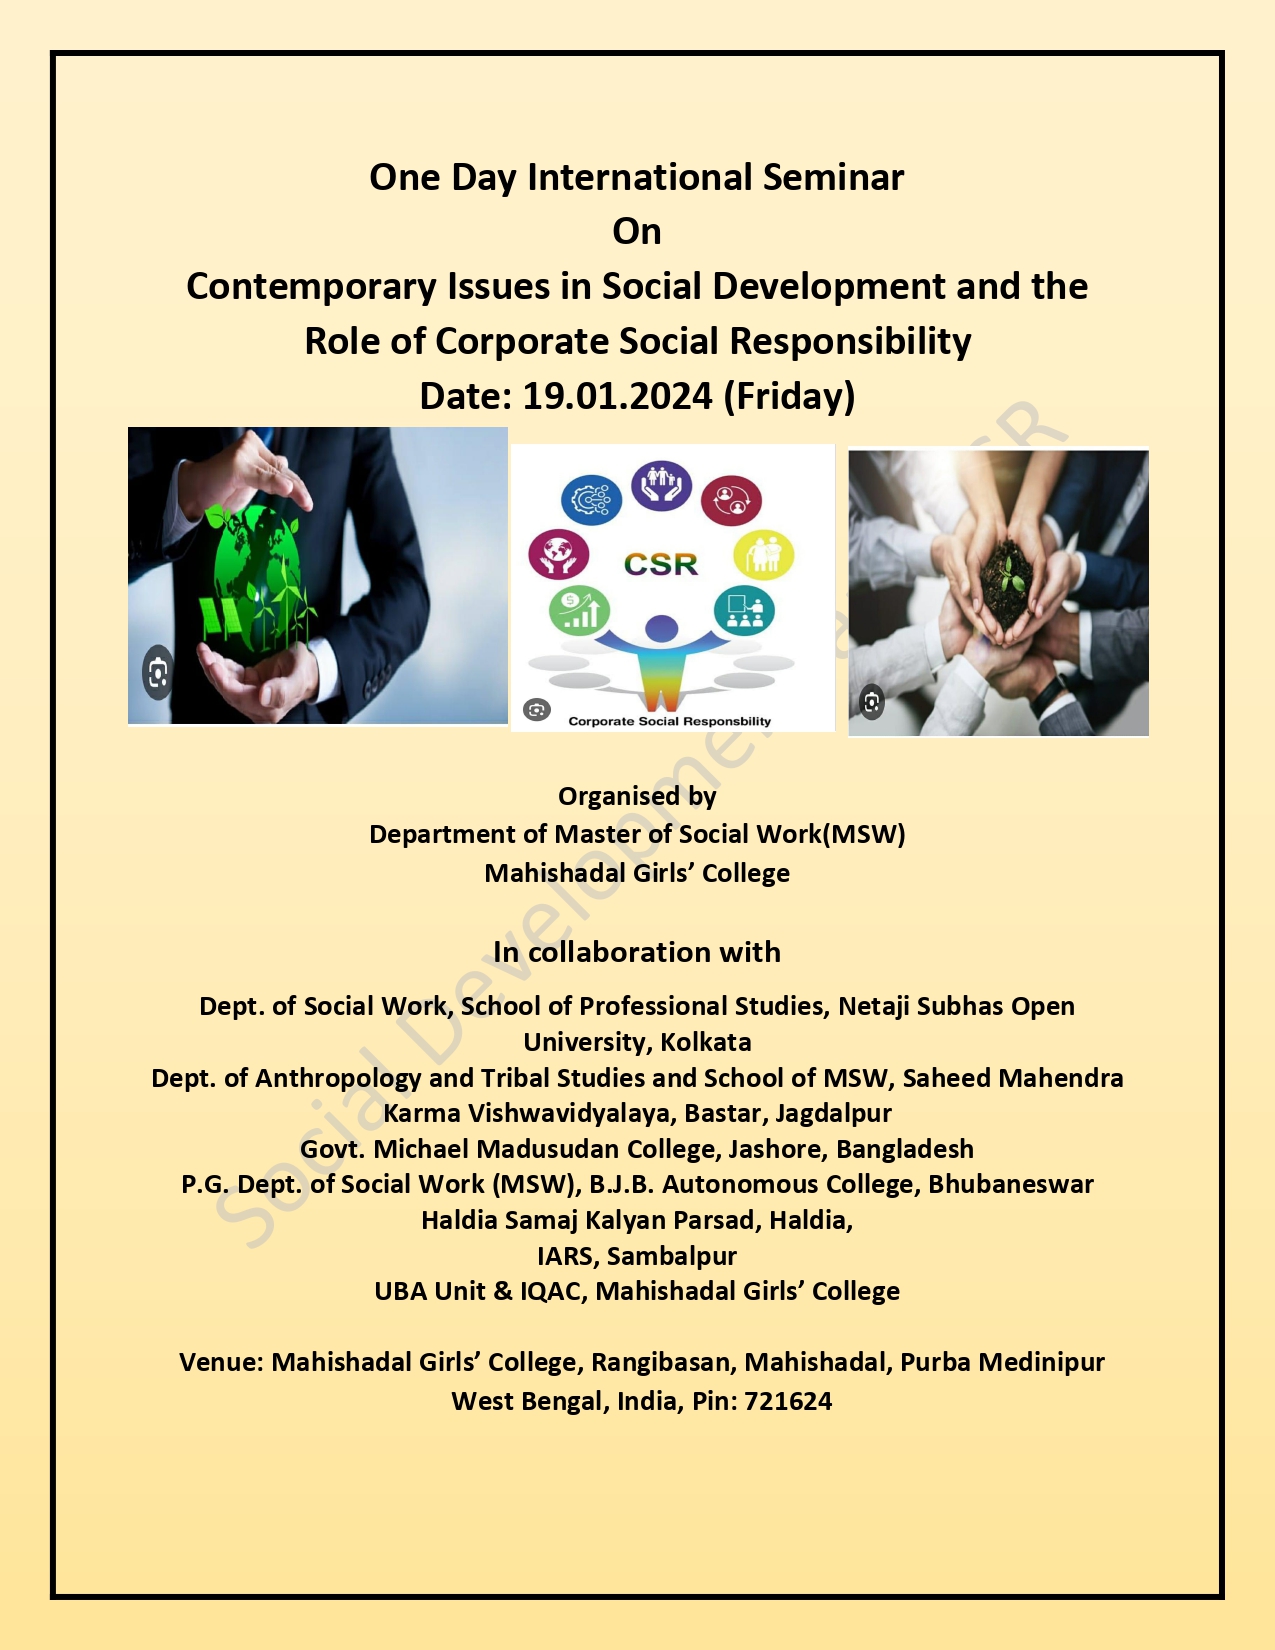 One Day International Seminar on “Contemporary Issues in Social Development and the Role of Corporate Social Responsibility”
on 19.01.2024